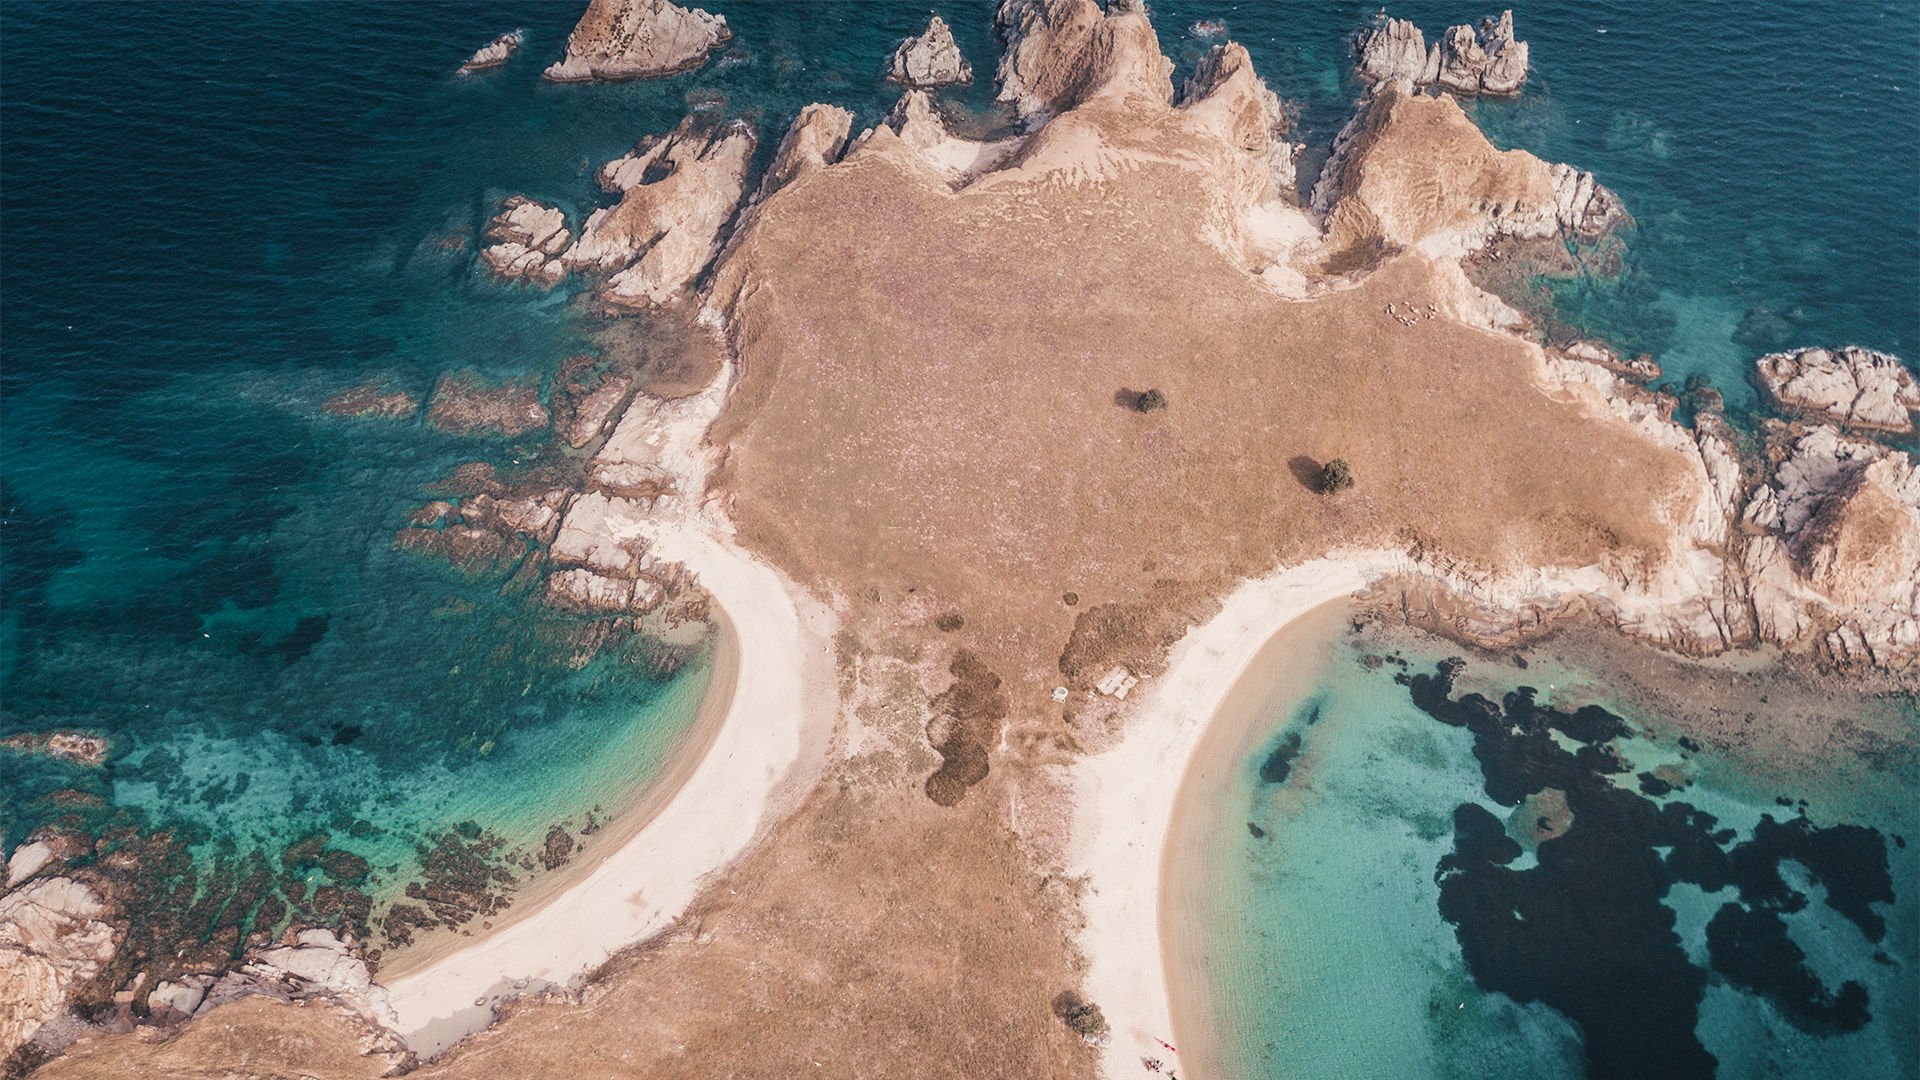 Drenia is a complex of little islets, about 2 miles away from the mainland and east of Ammouliani island